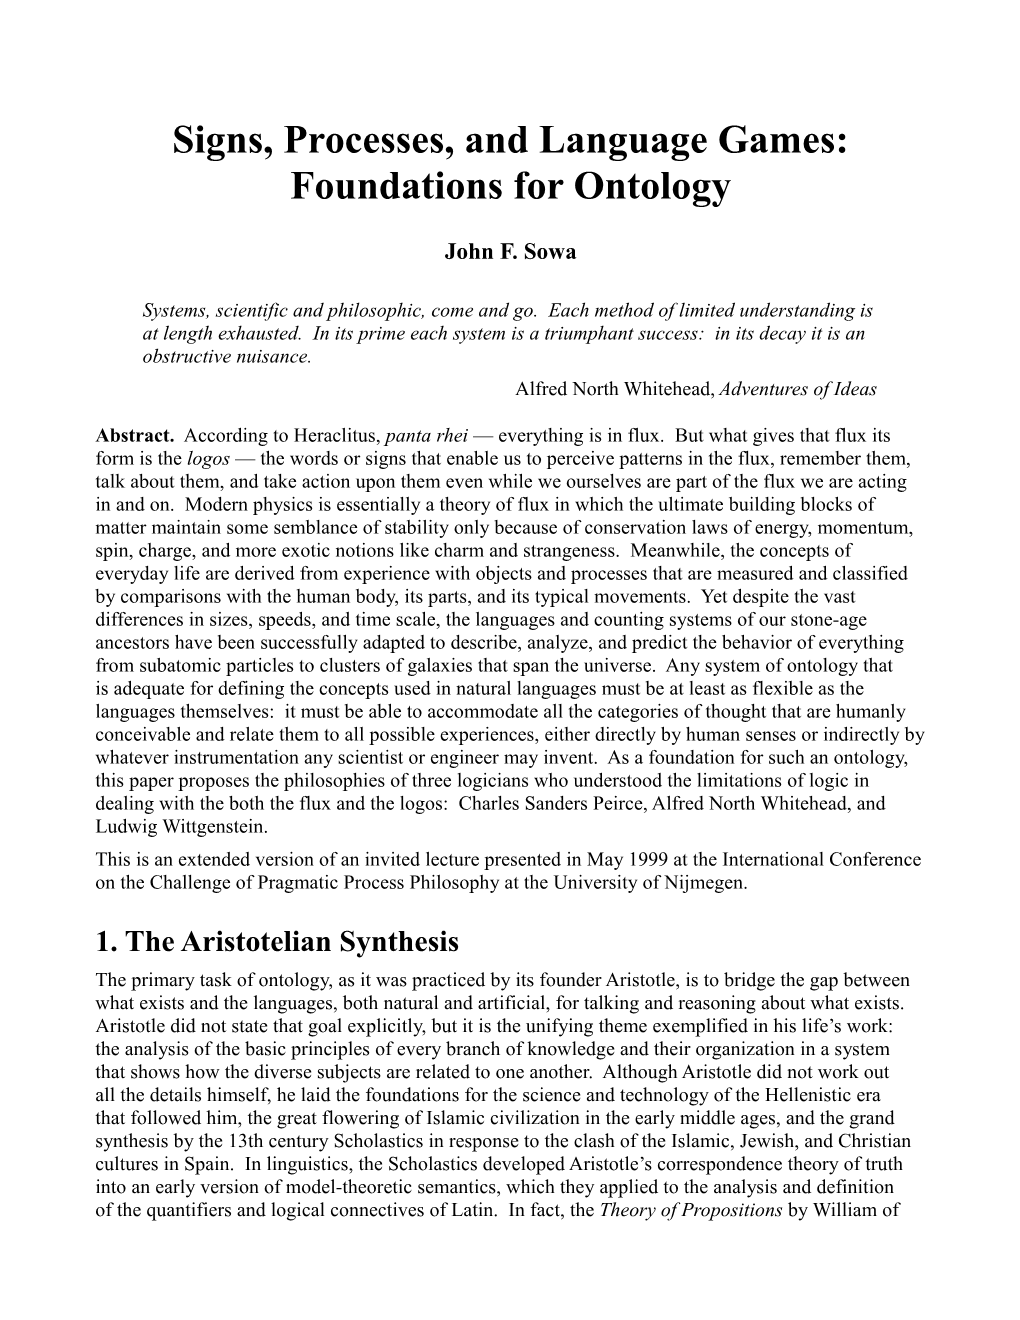 Signs, Processes, and Language Games: Foundations for Ontology